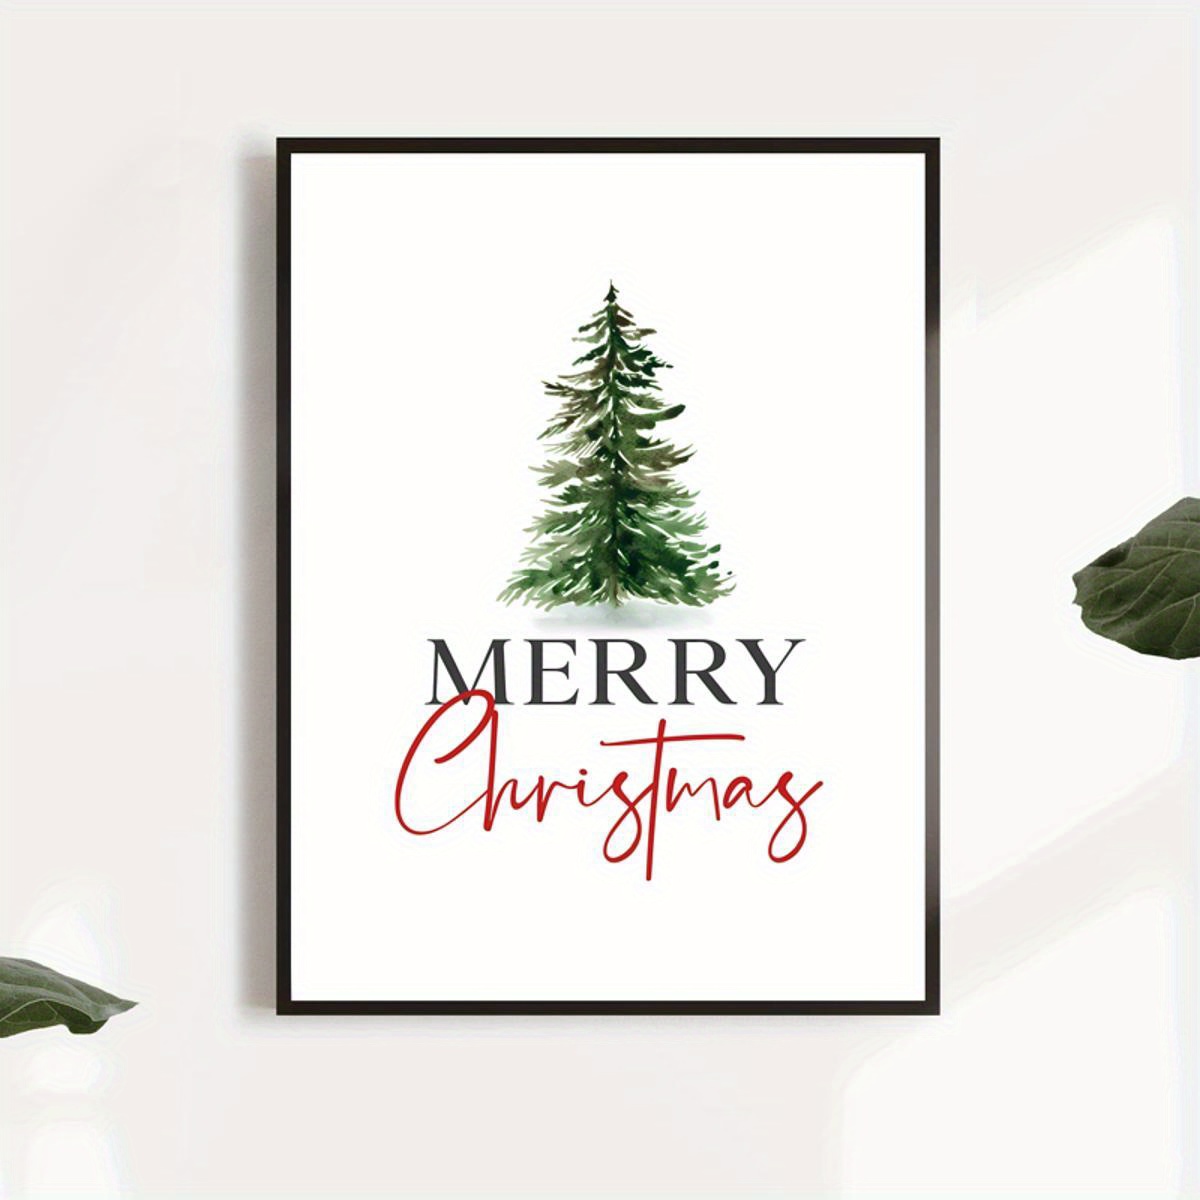 Merry christmas. stylish rustic christmas gift and pine branches, posters  for the wall • posters postcard, pine, paper